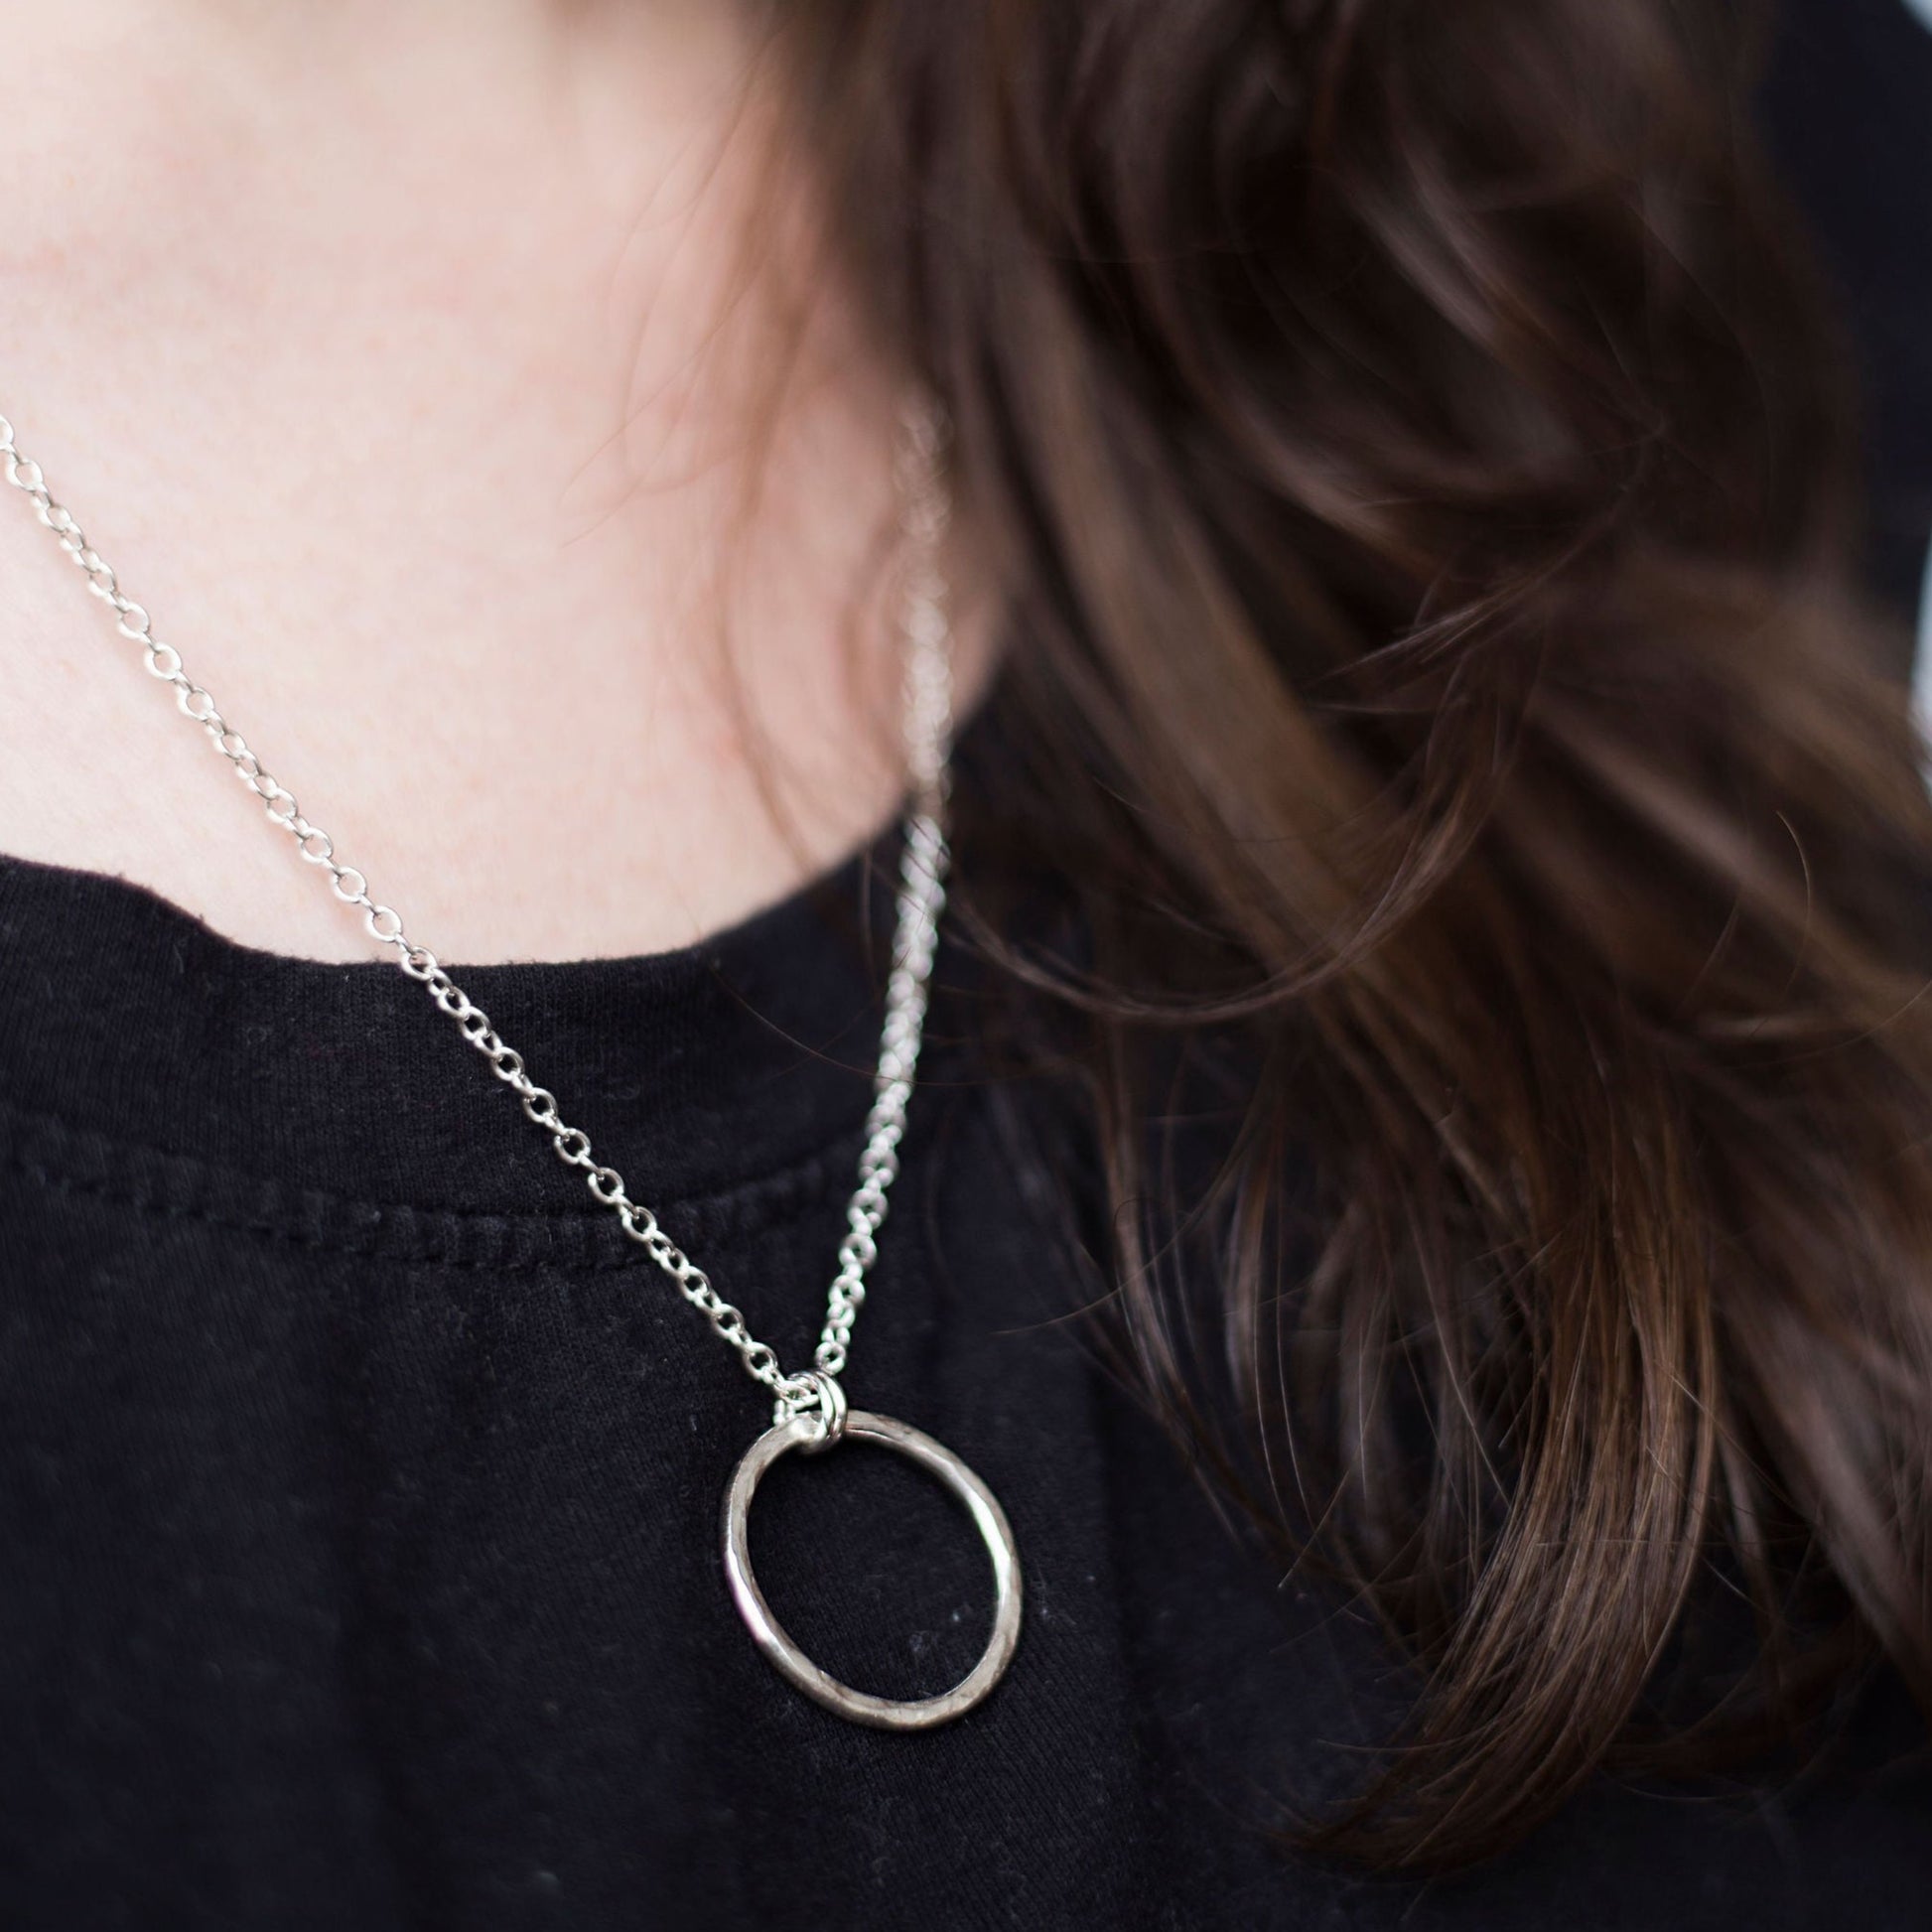 Hammered Silver Circle Necklace worn with a black t-shirt , handmade by Anna Calvert Jewellery